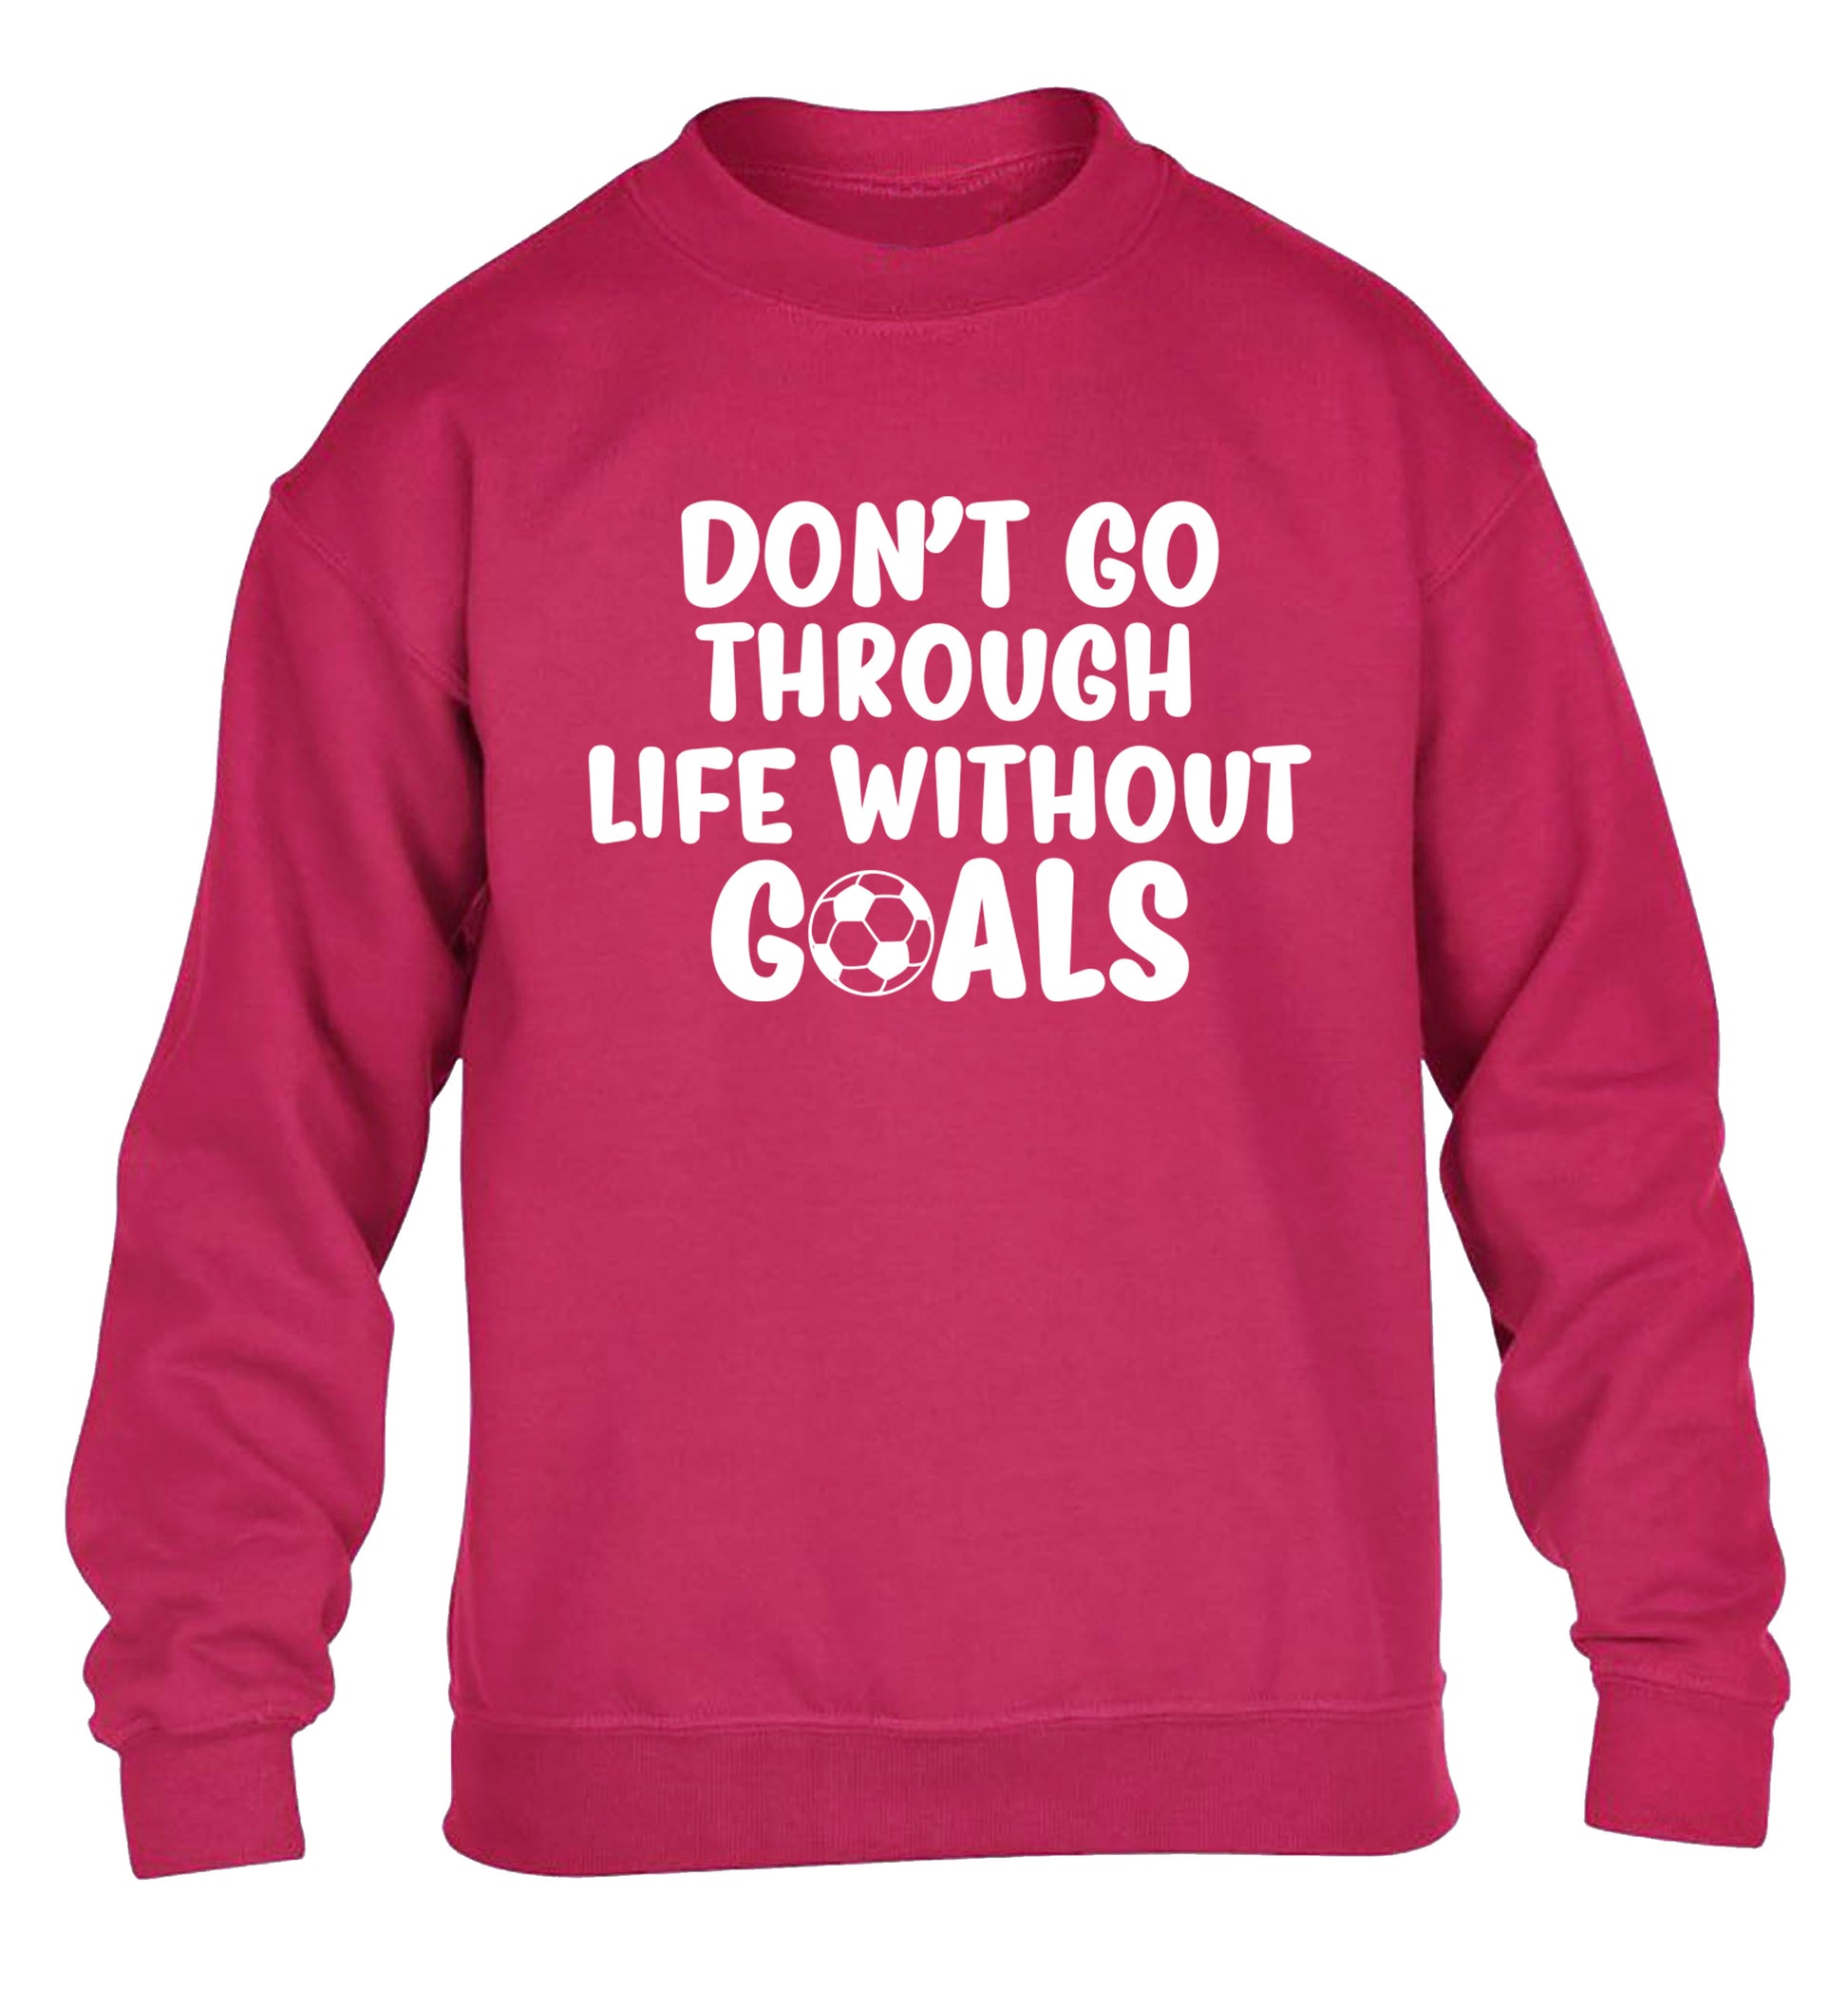 Don't go through life without goals children's pink sweater 12-14 Years